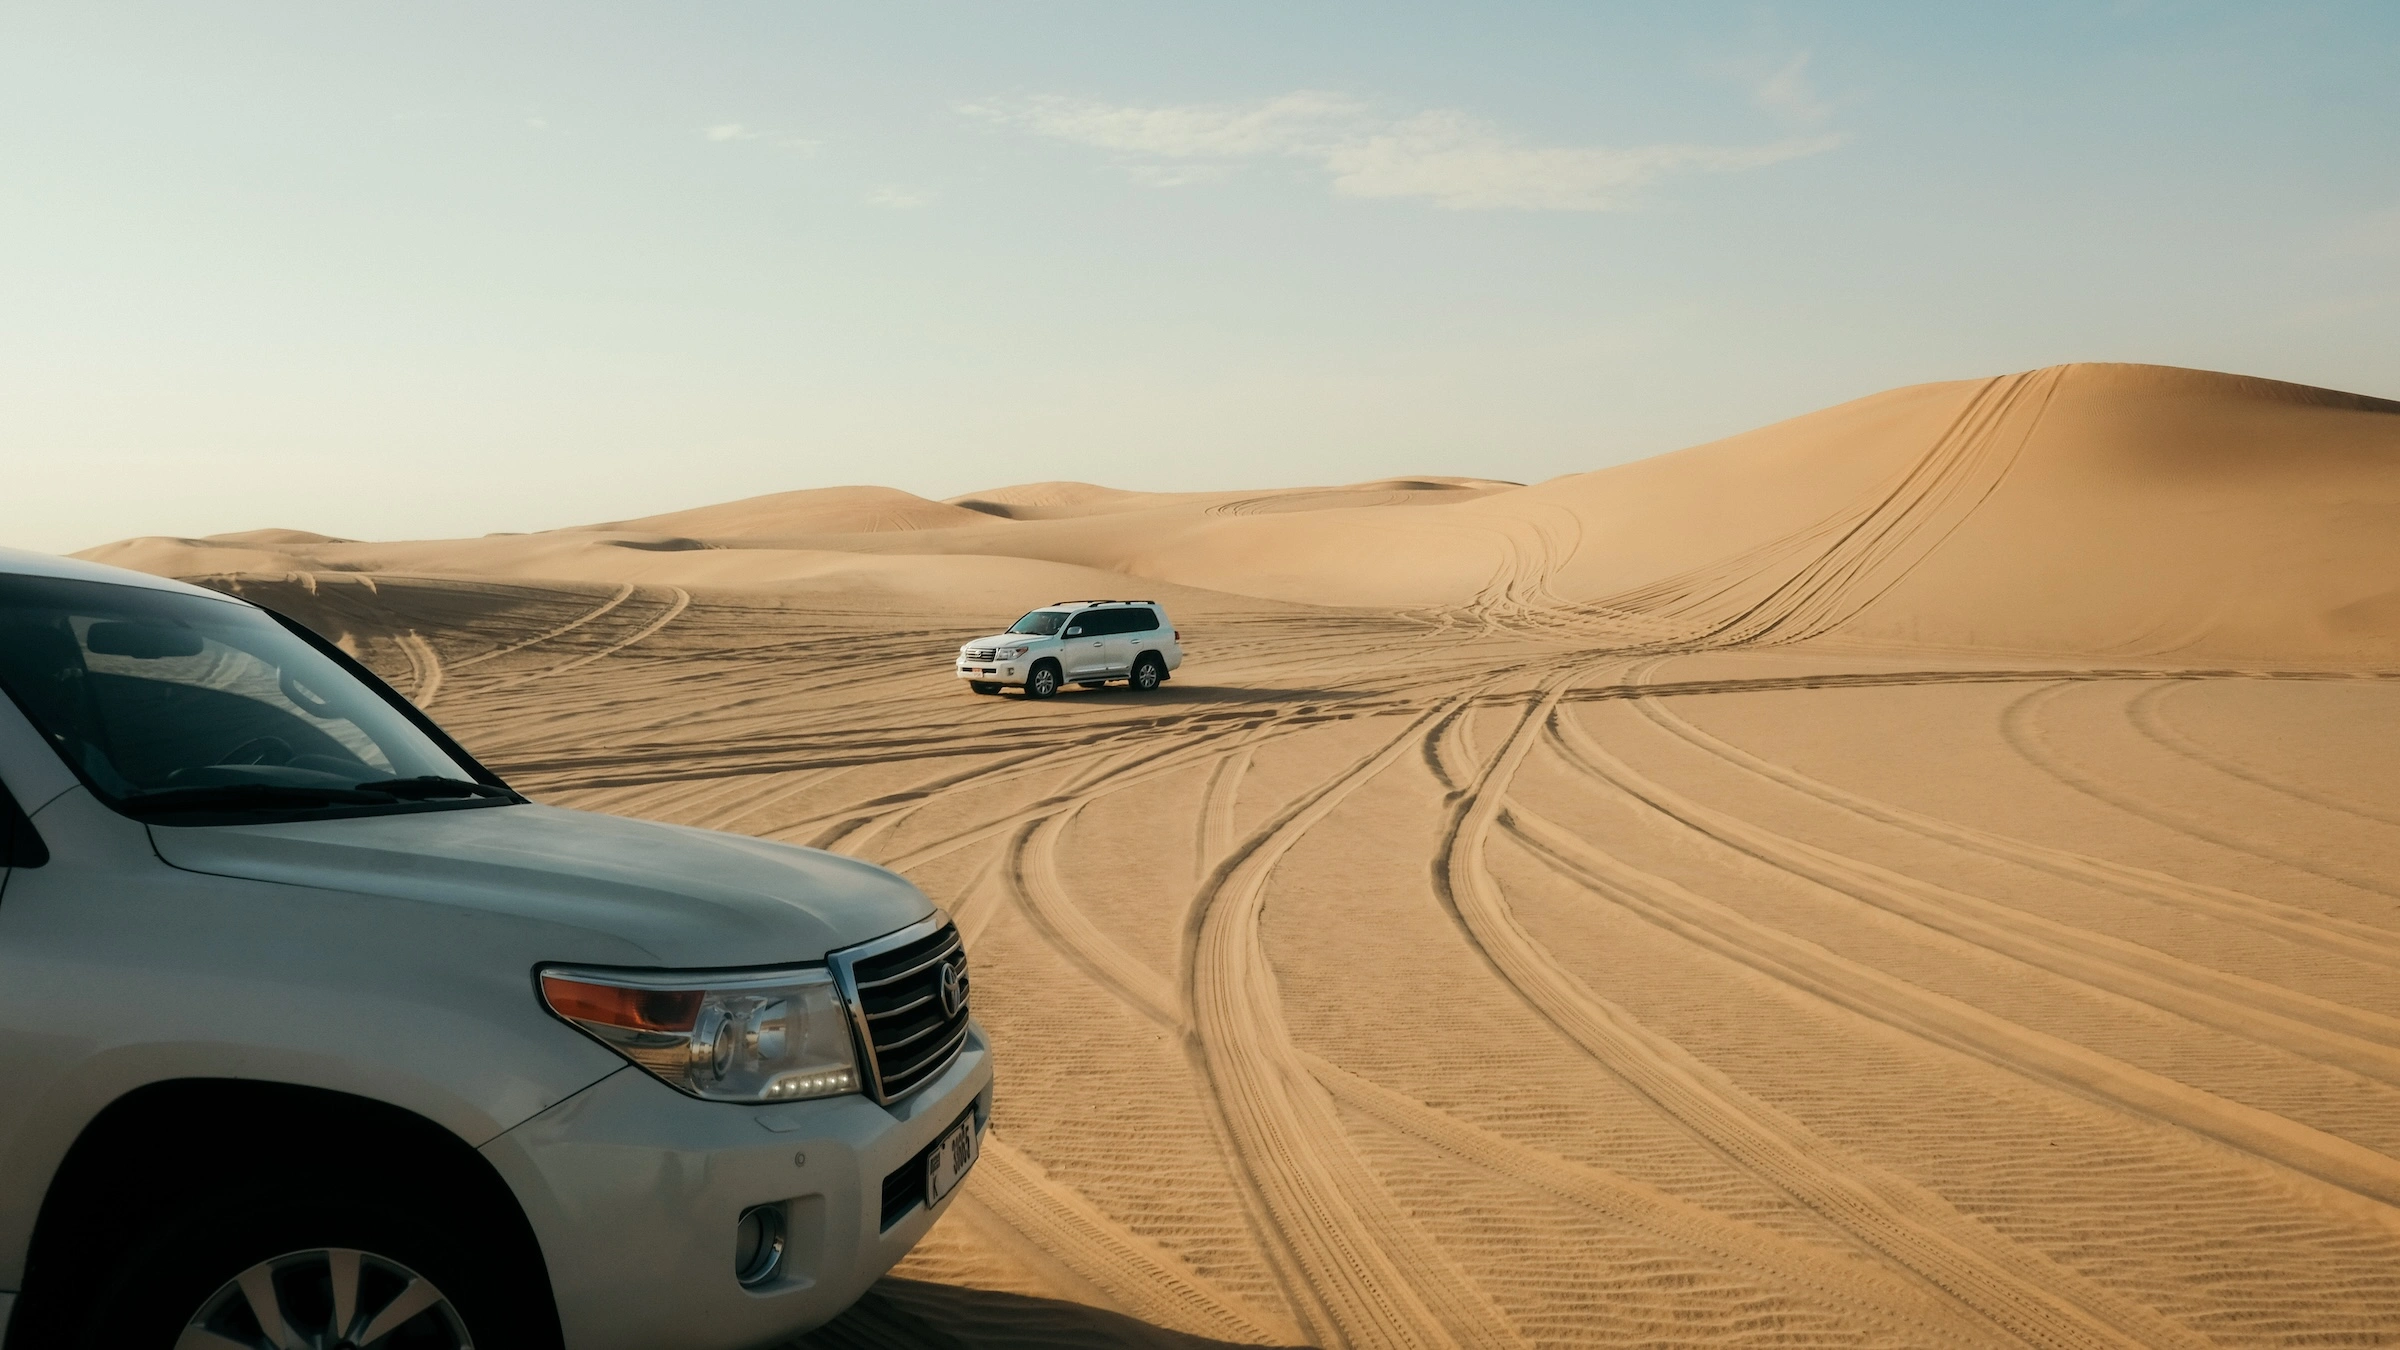 an image of two land cruiser 4x4 parked in the desert with a large sand dune nearby